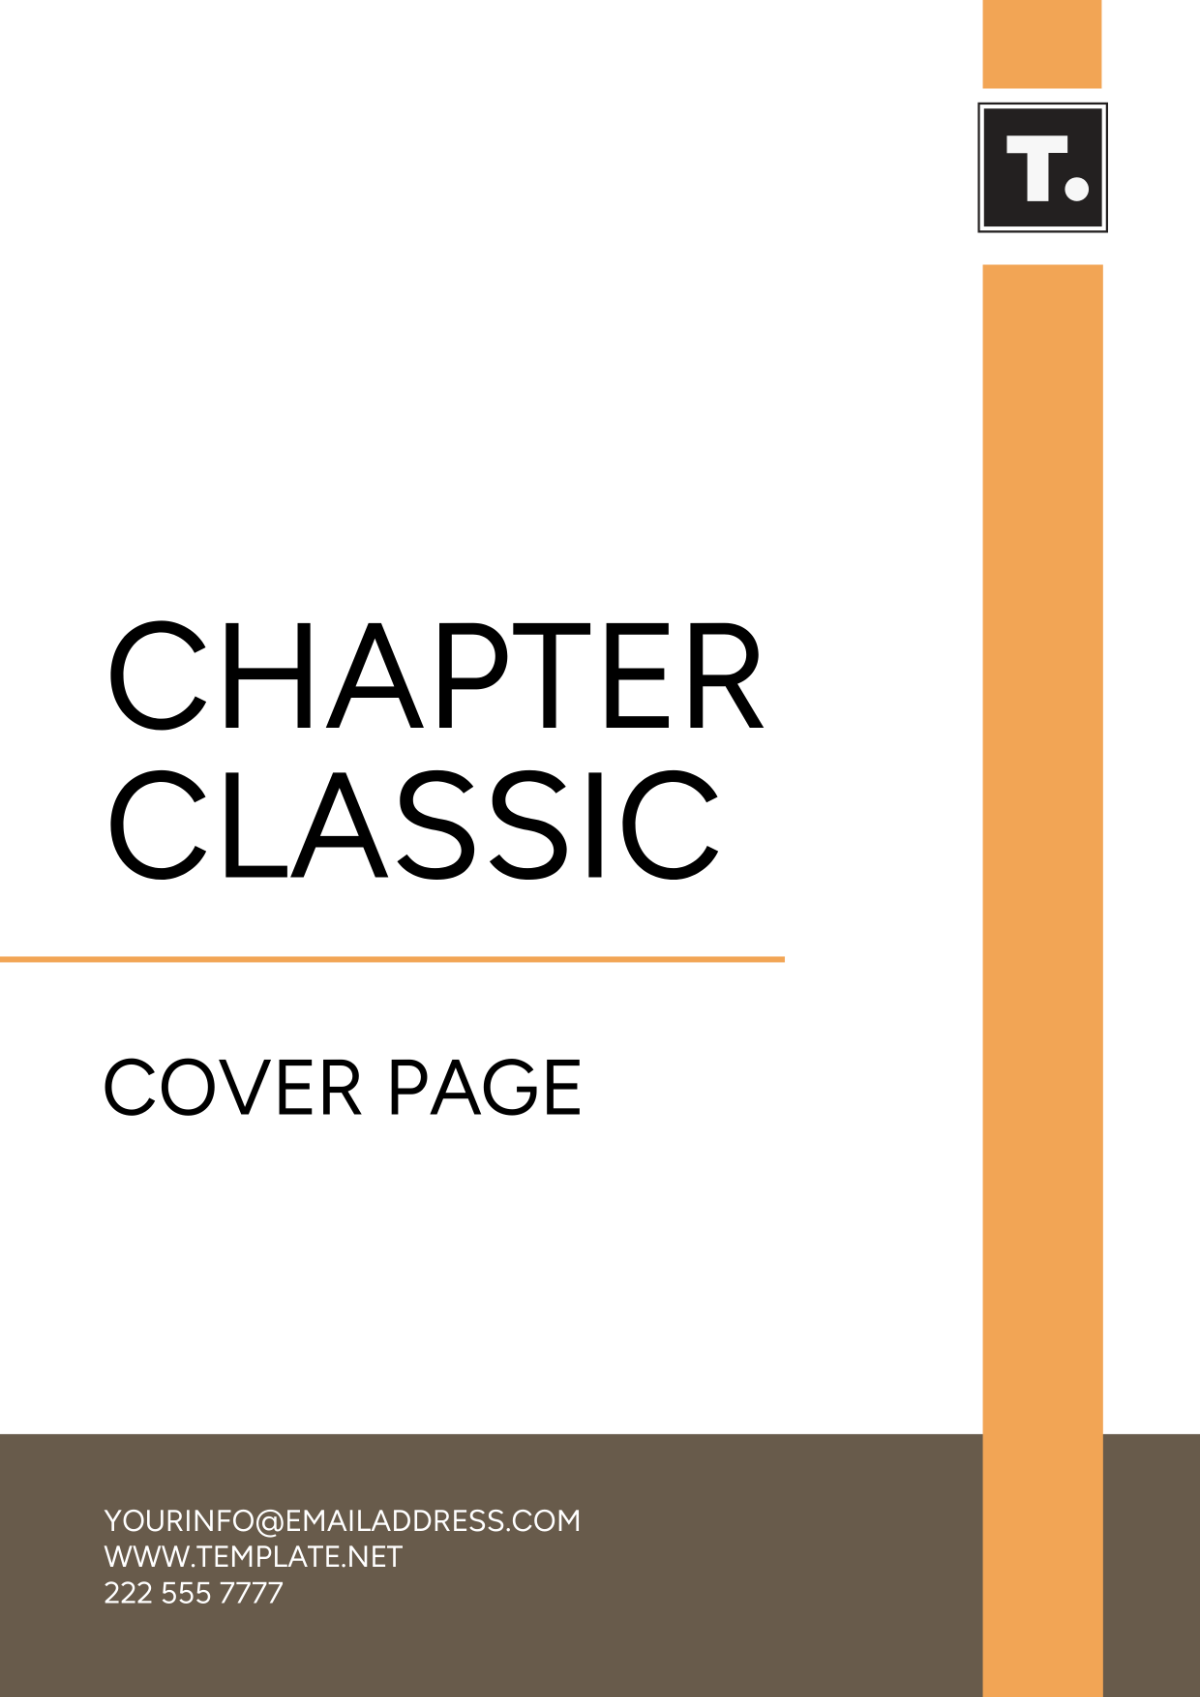 Chapter Classic Cover Page Template